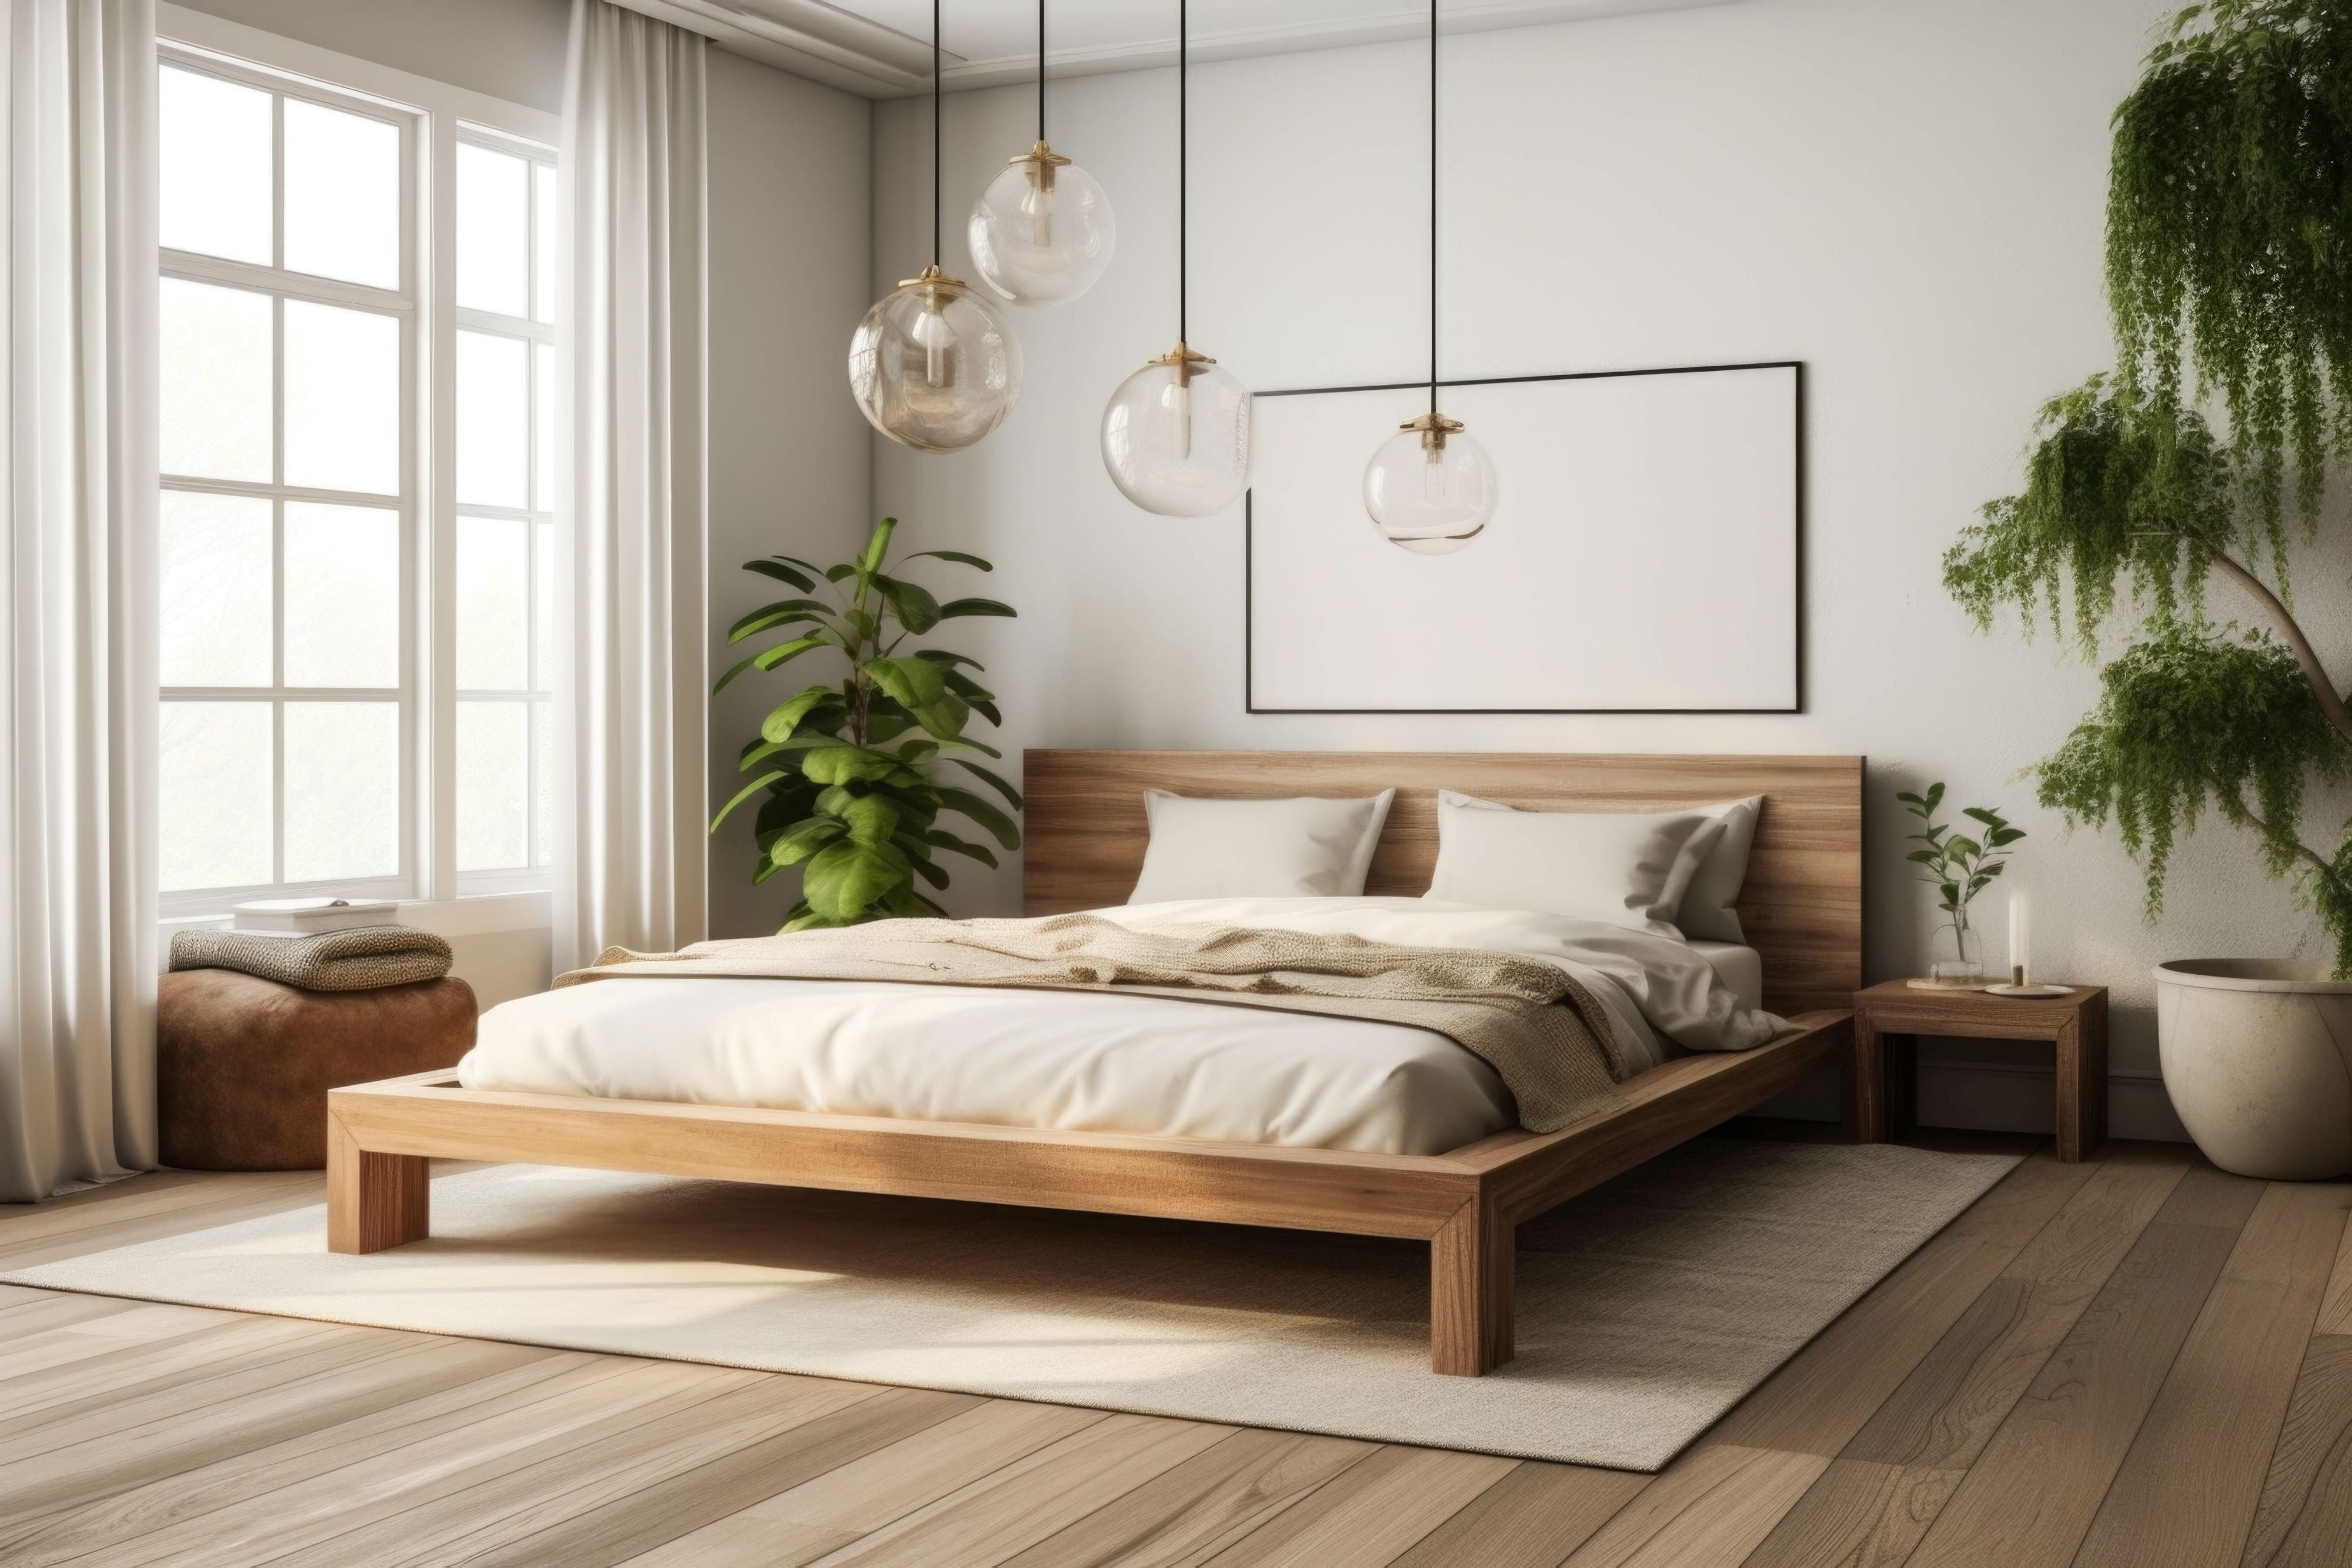 A serene and zen-inspired bedroom with a platform bed, minimalistic decor, and a calming color palette for a peaceful and restful atmosphere